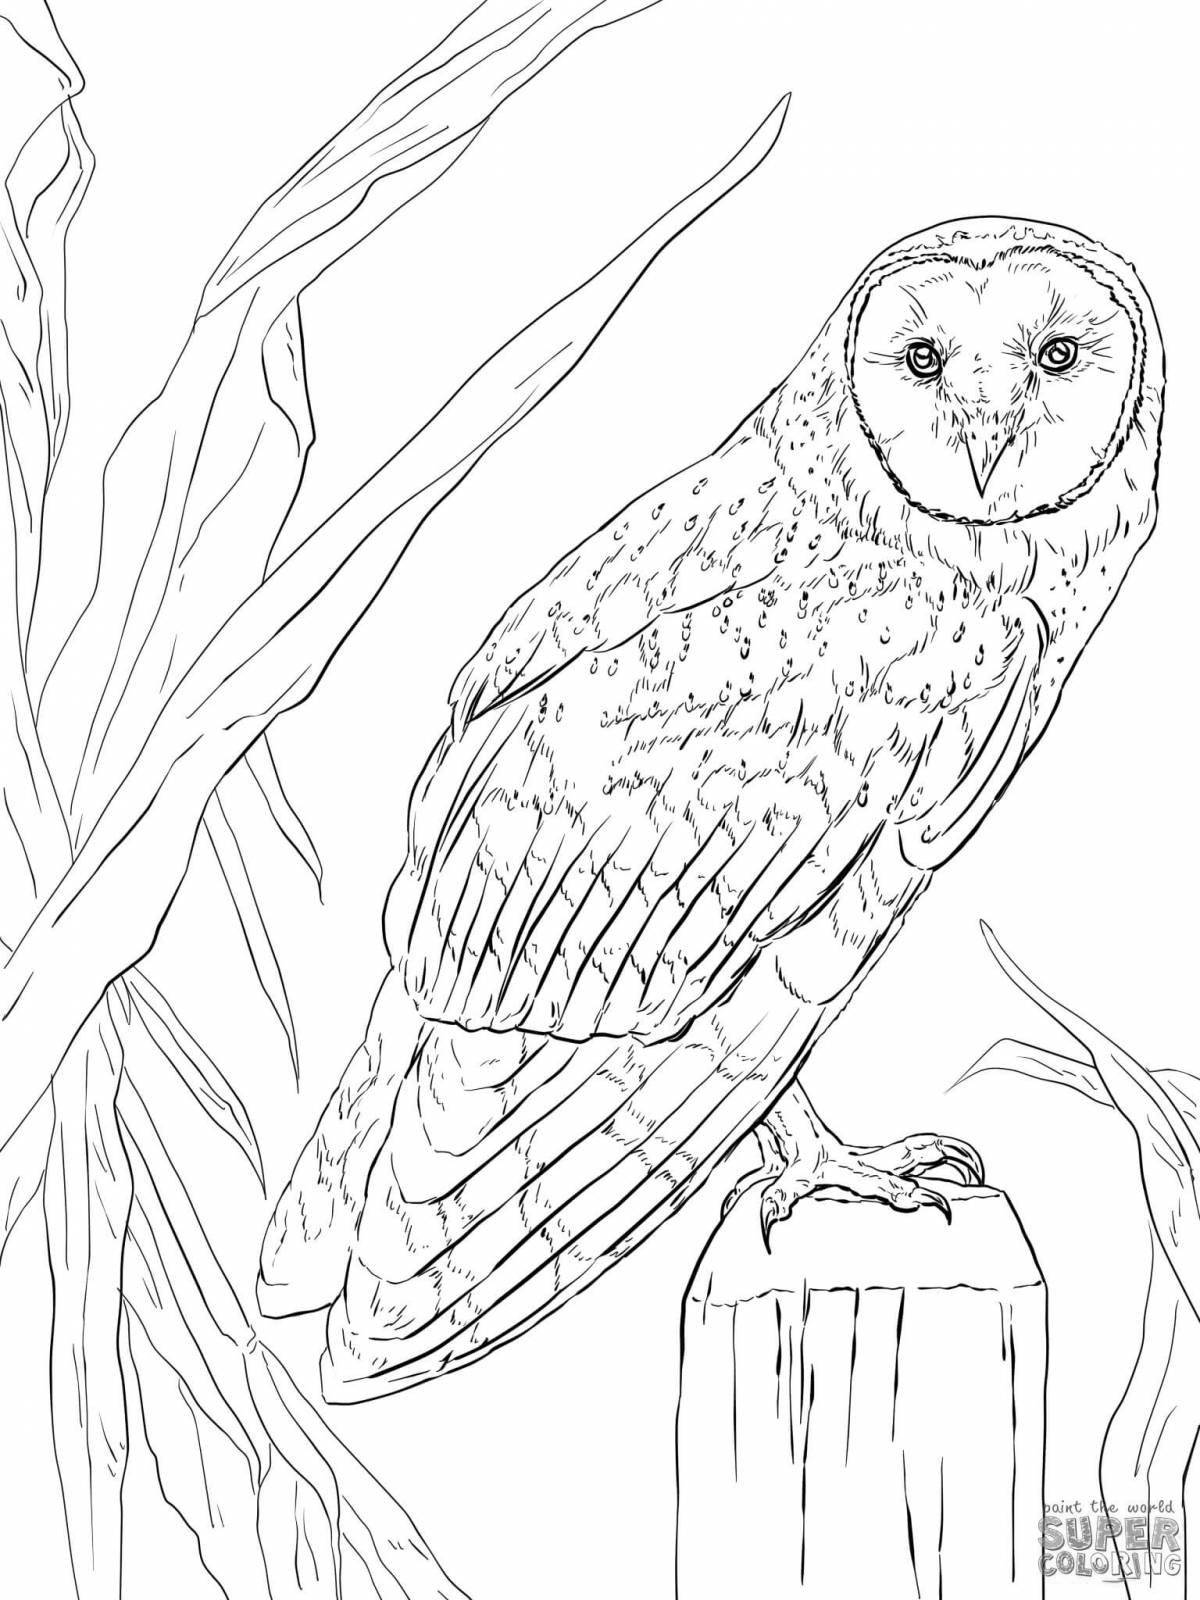 Coloring book dazzling snowy owl